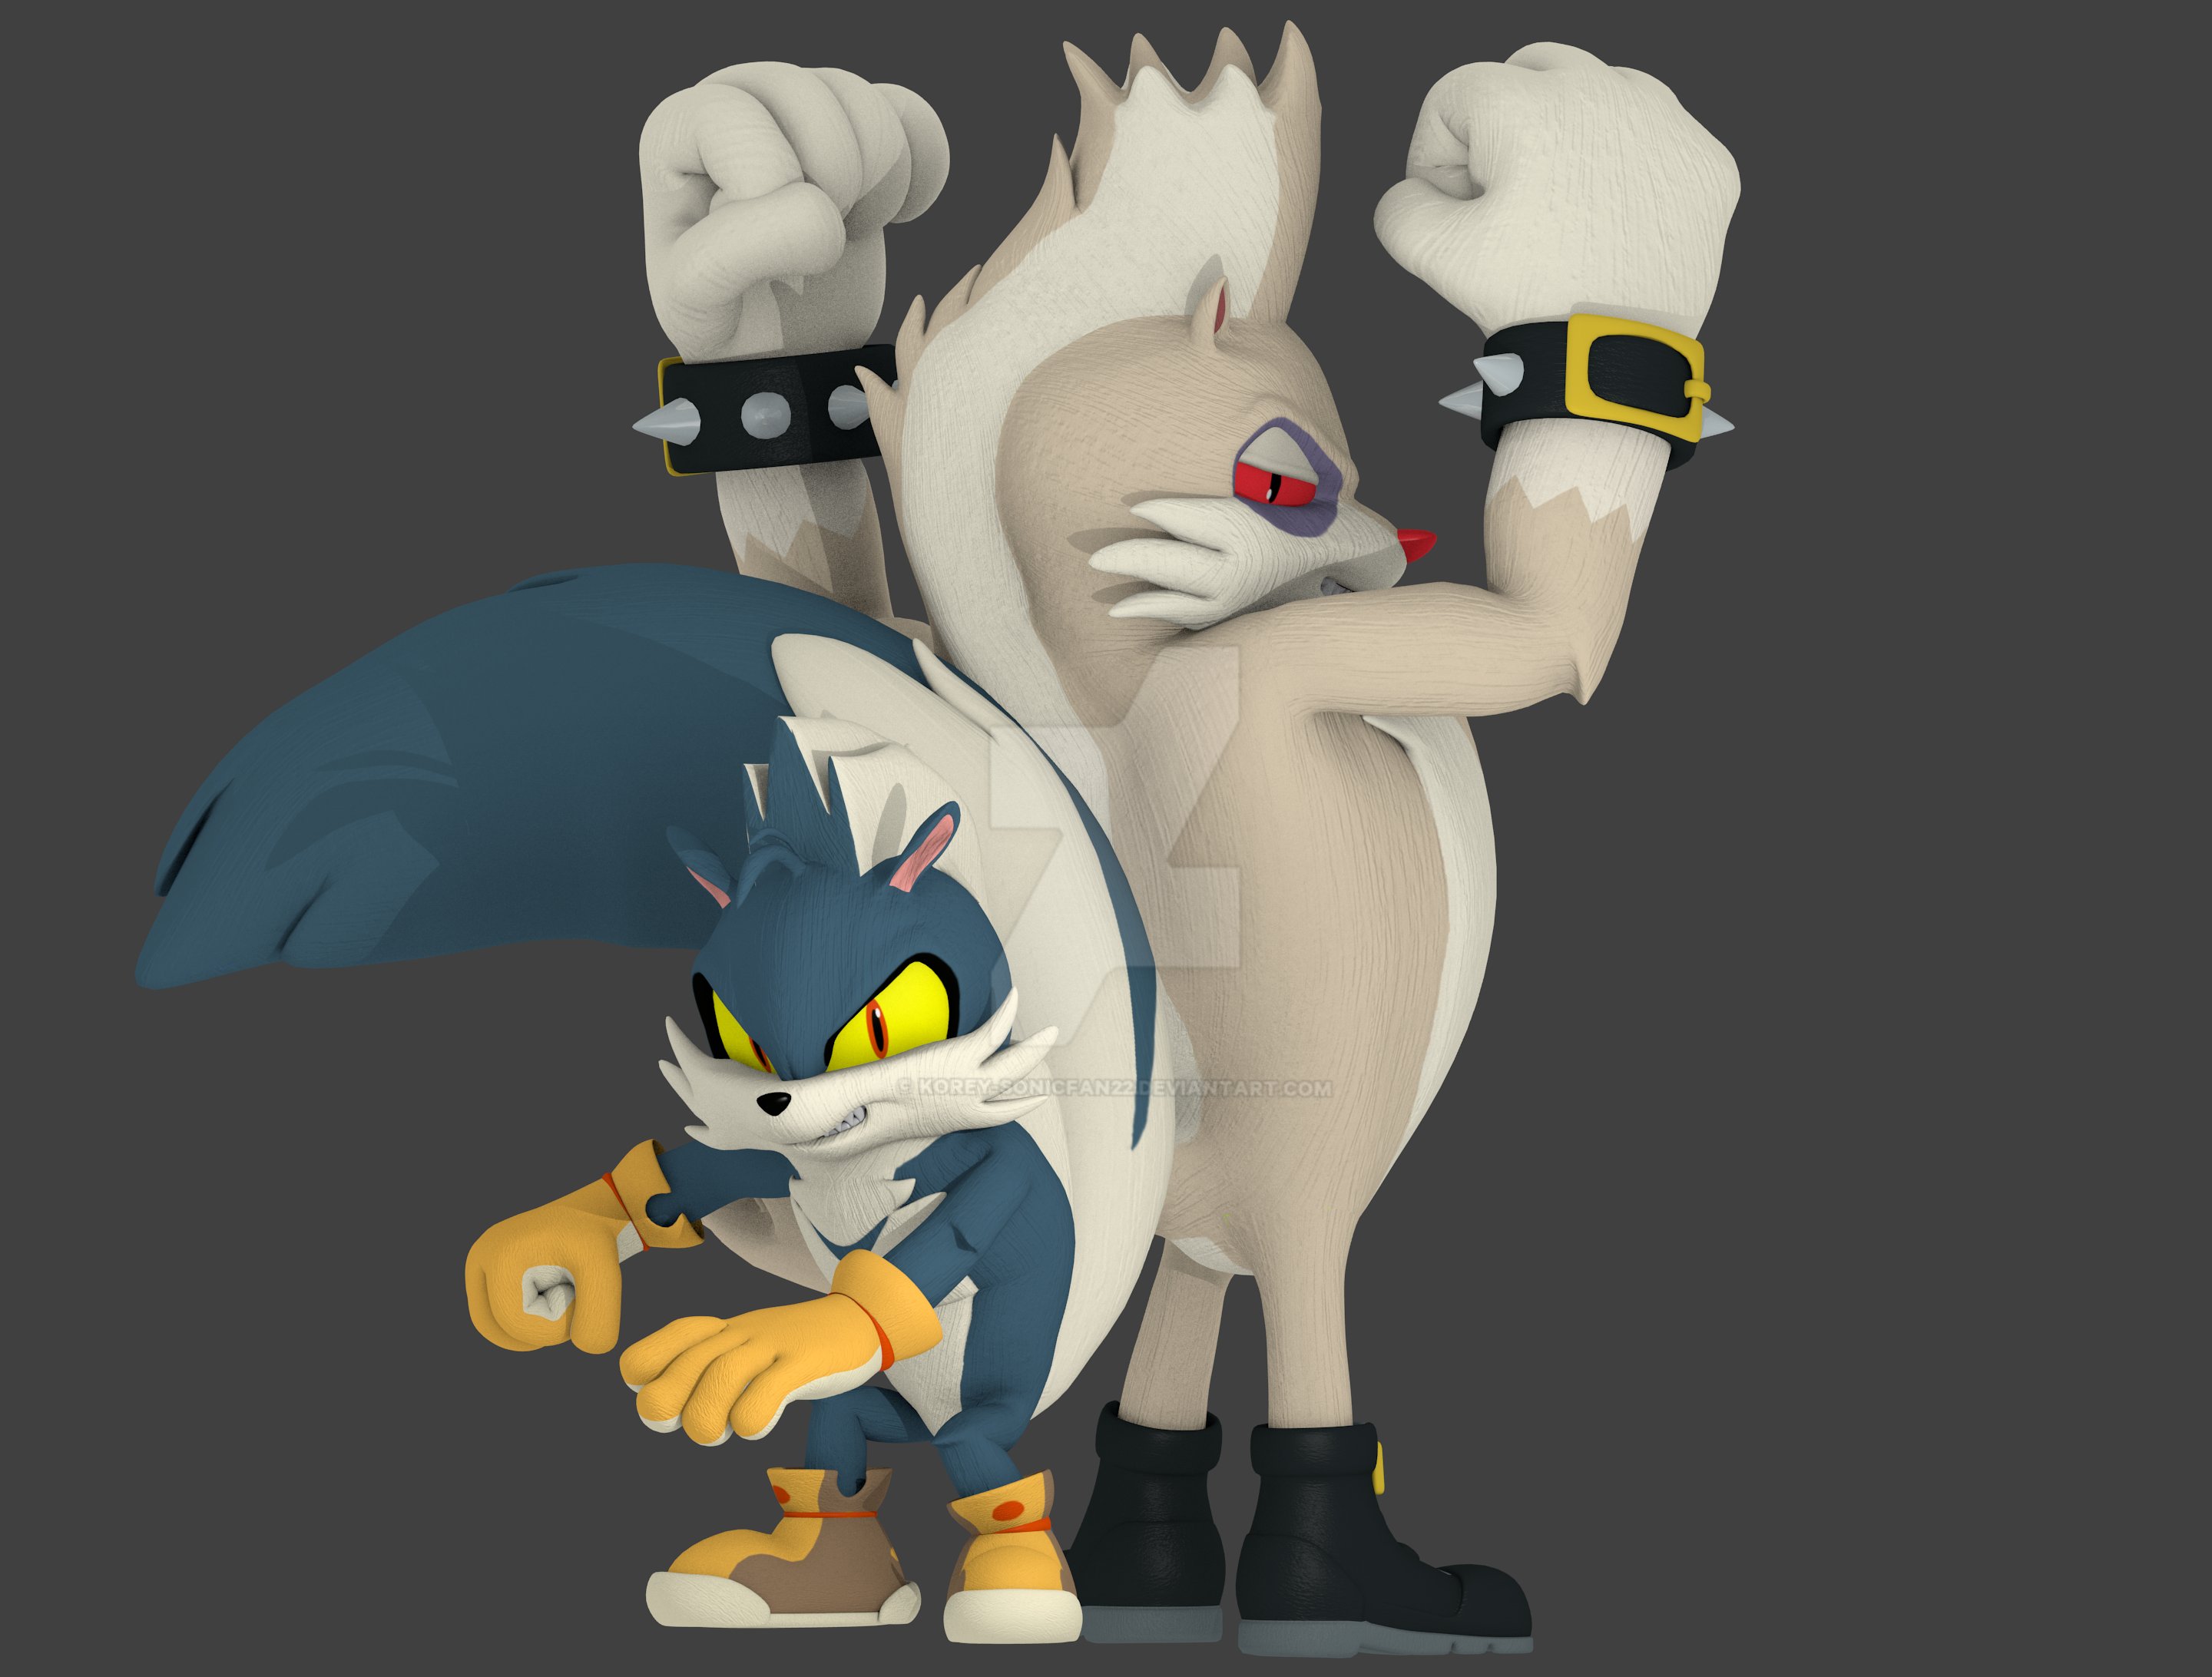 Korey_Sonicfan22(Comms on Twitter: "Rough: From one to another. Tumble: We're always ready to rumble. Rough: For we are the 3D versions of... and Tumble: ROUGH AND #RoughAndTumble #RoughtheSkunk #